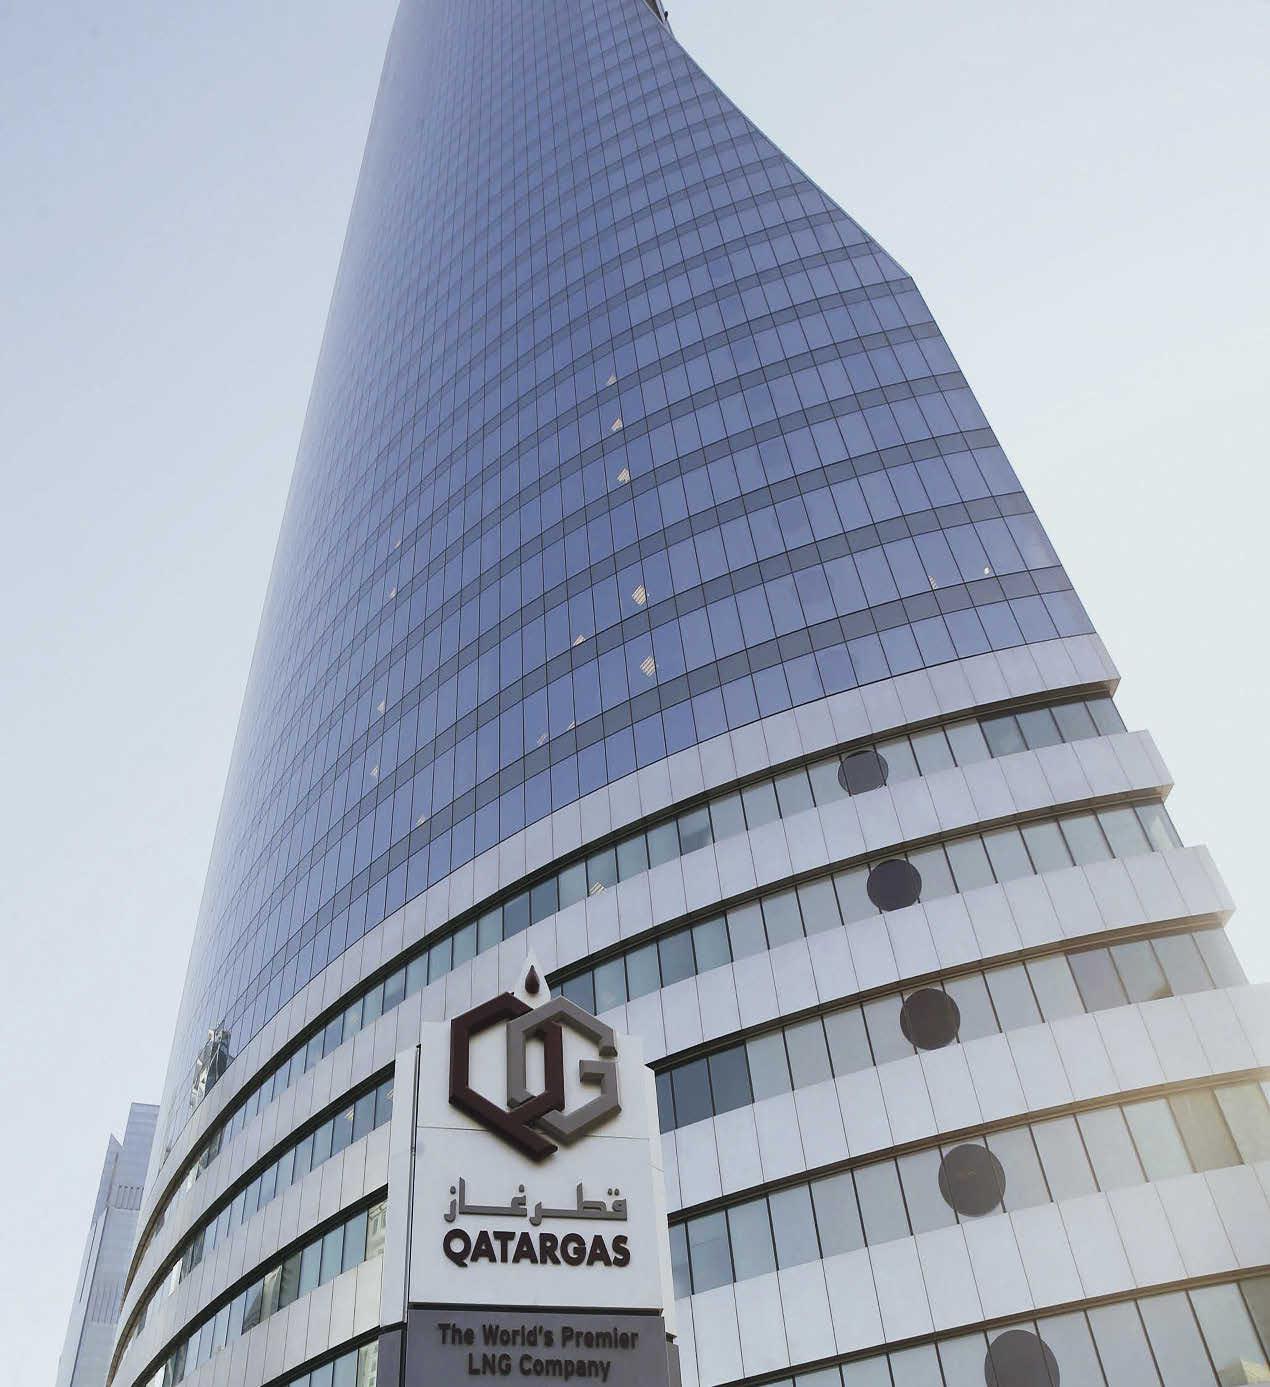 The headquarters of the liquefied natural gas company Qatargas in Doha. The country is the world's largest exporter - along with Australia - of LNG. FADI AL-ASSAAD/REUTERS